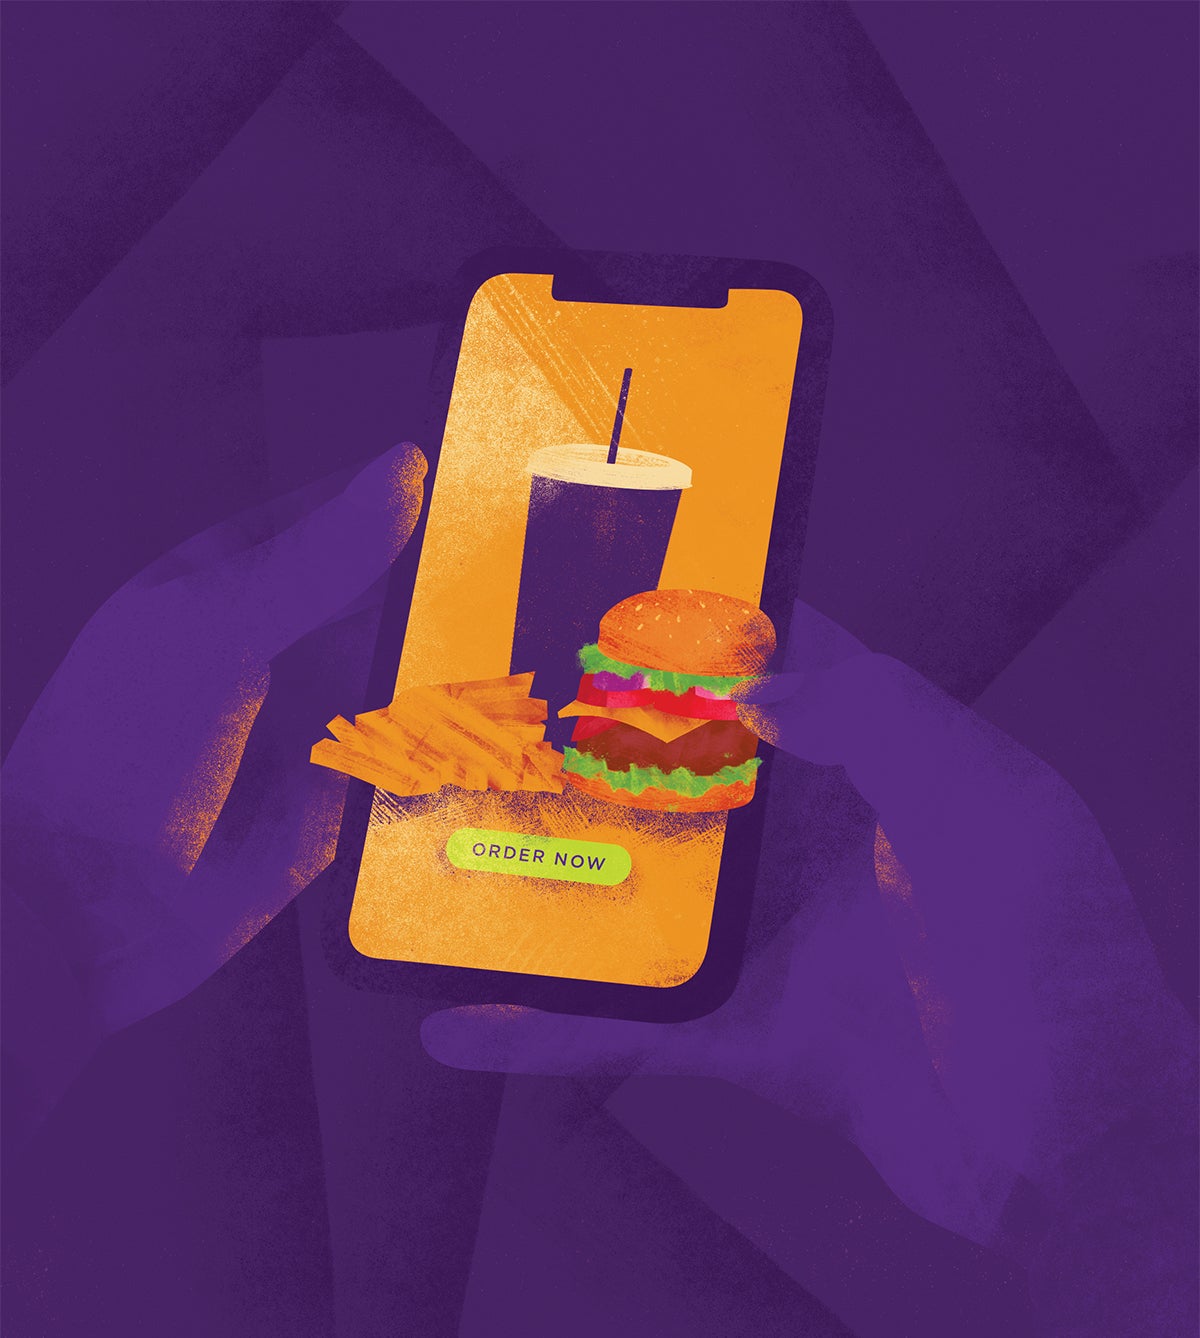 An illustration of a person holding a phone that shows a burger, fries, drink and an 